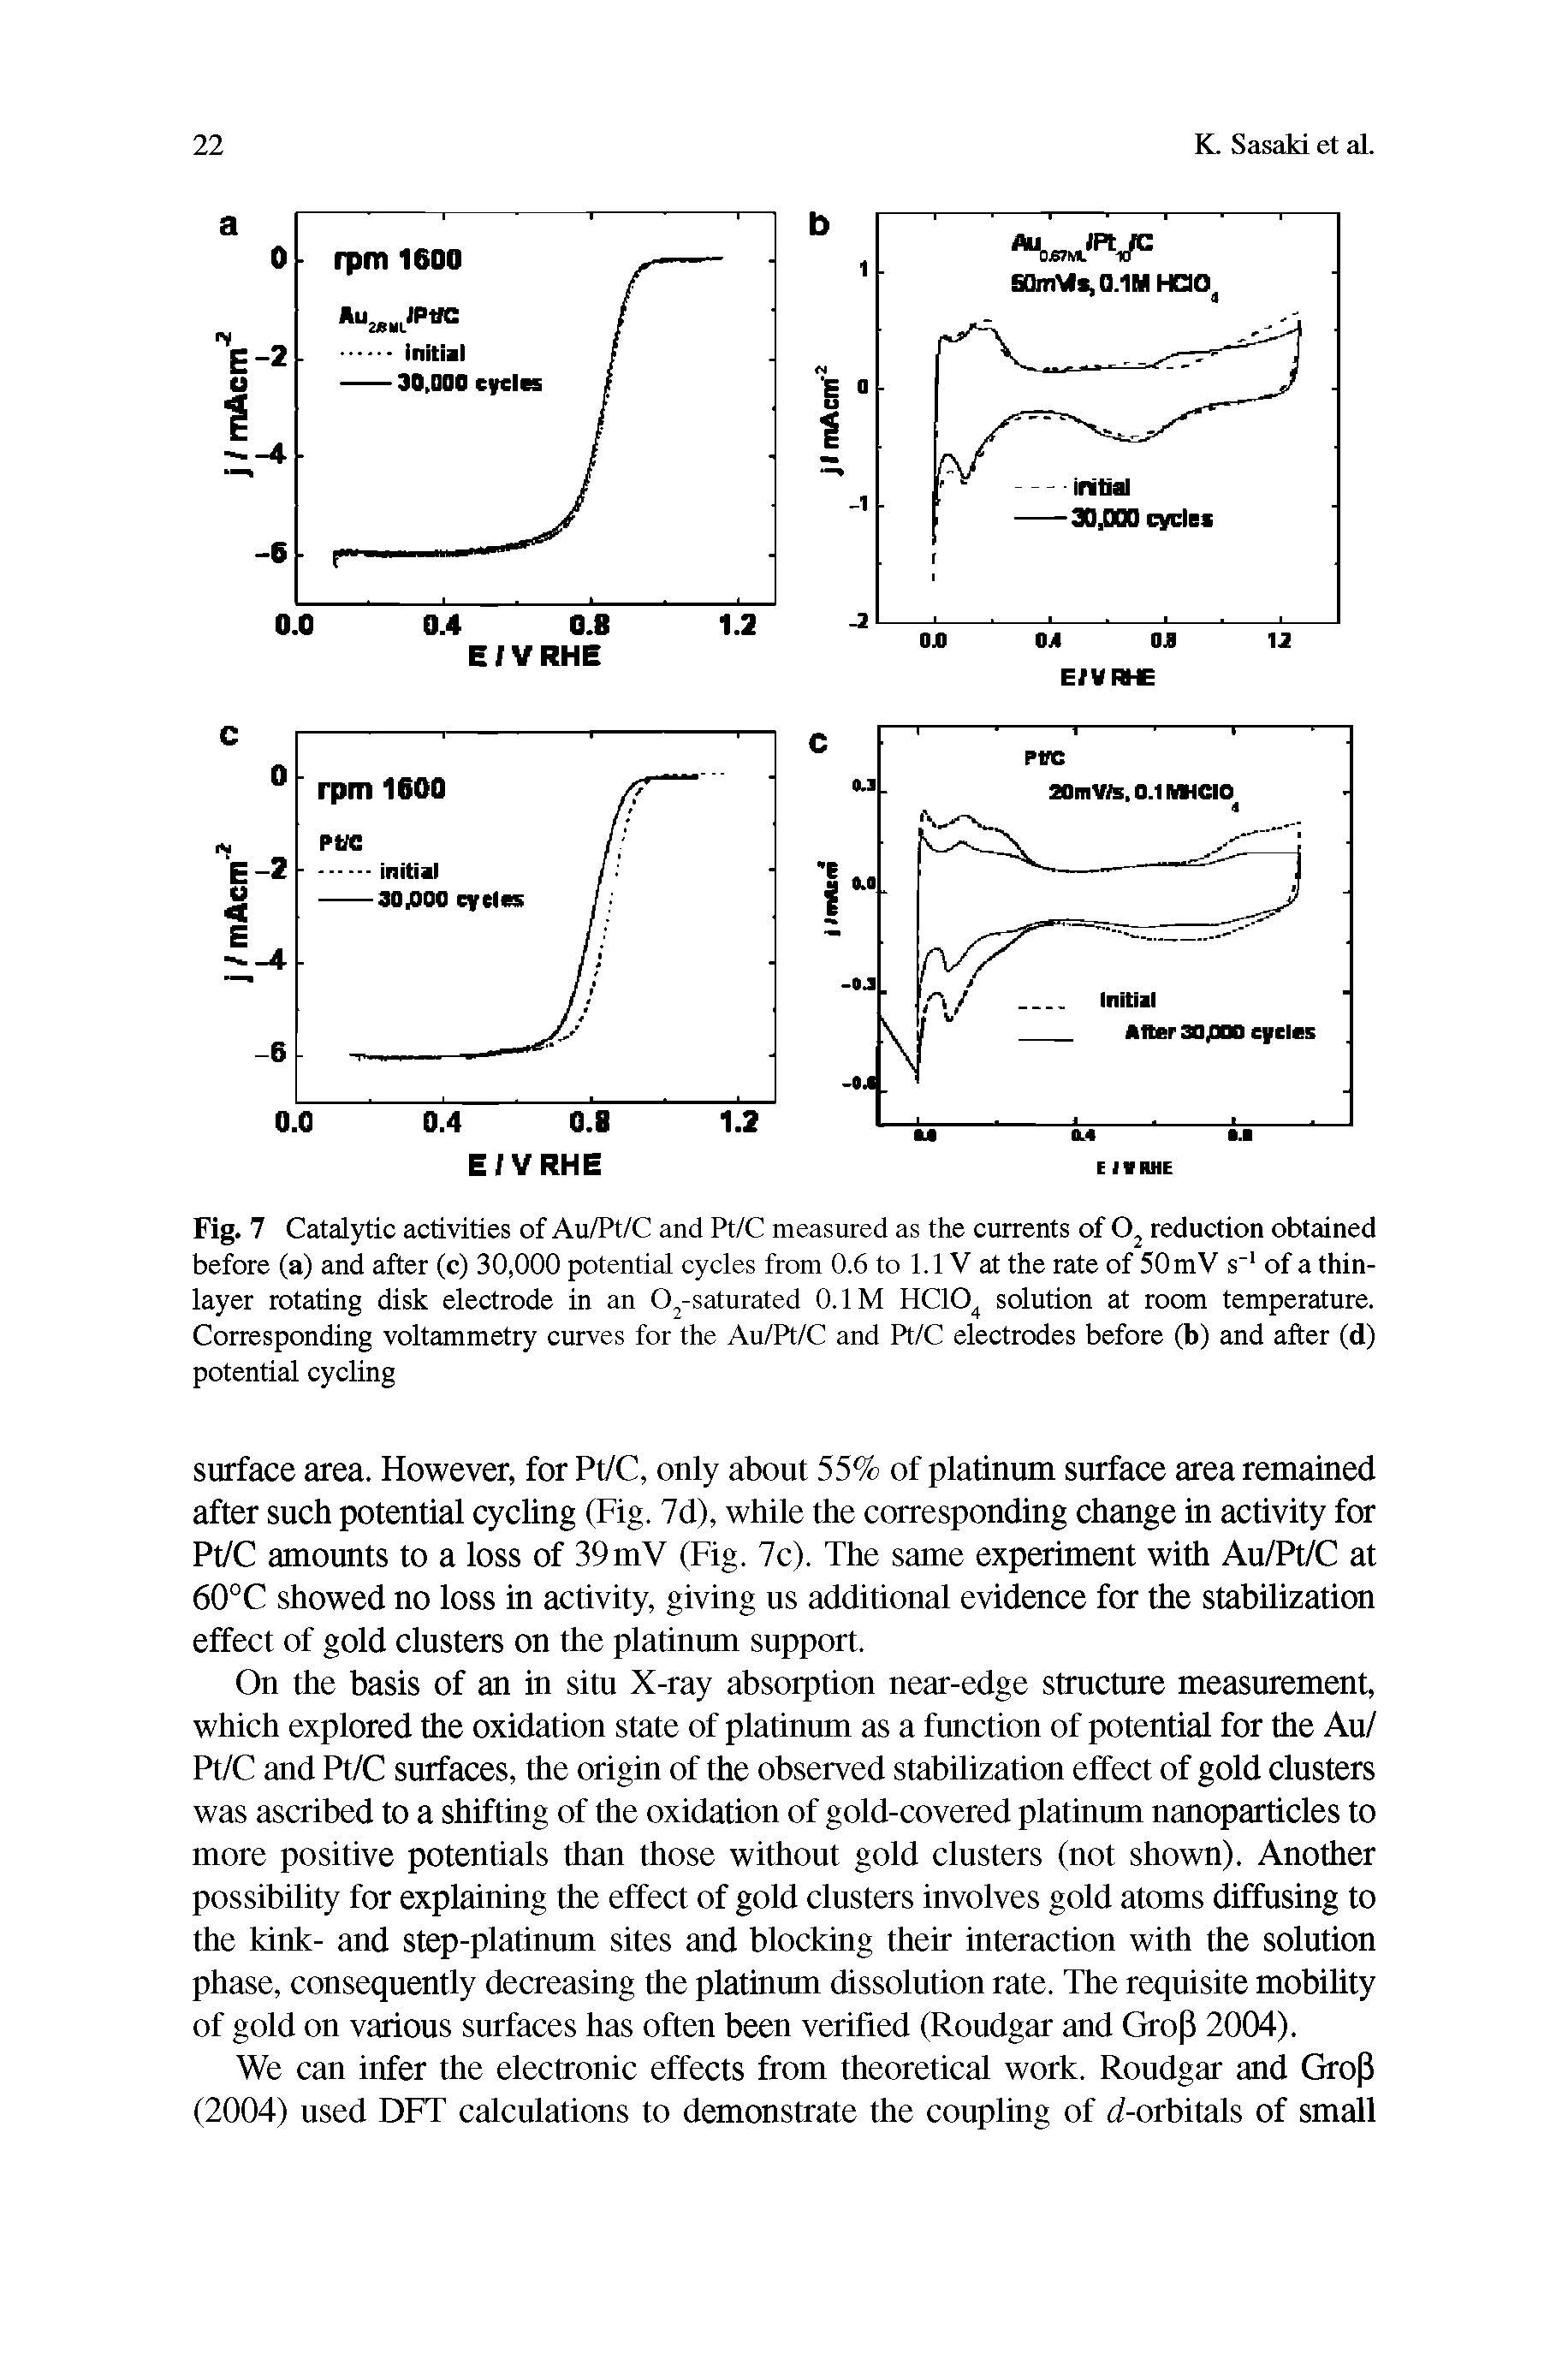 Fig. 7 Catalytic activities of Au/Pt/C and Pt/C measured as the currents of reduction obtained before (a) and after (c) 30,000 potential cycles from 0.6 to 1.1 V at the rate of 50mV s of a thin-layer rotating disk electrode in an O -saturated O.IM HCIO solution at room temperature. Corresponding voltammetry curves for the Au/Pt/C and Pt/C electrodes before (b) and after (d) potential cycling...